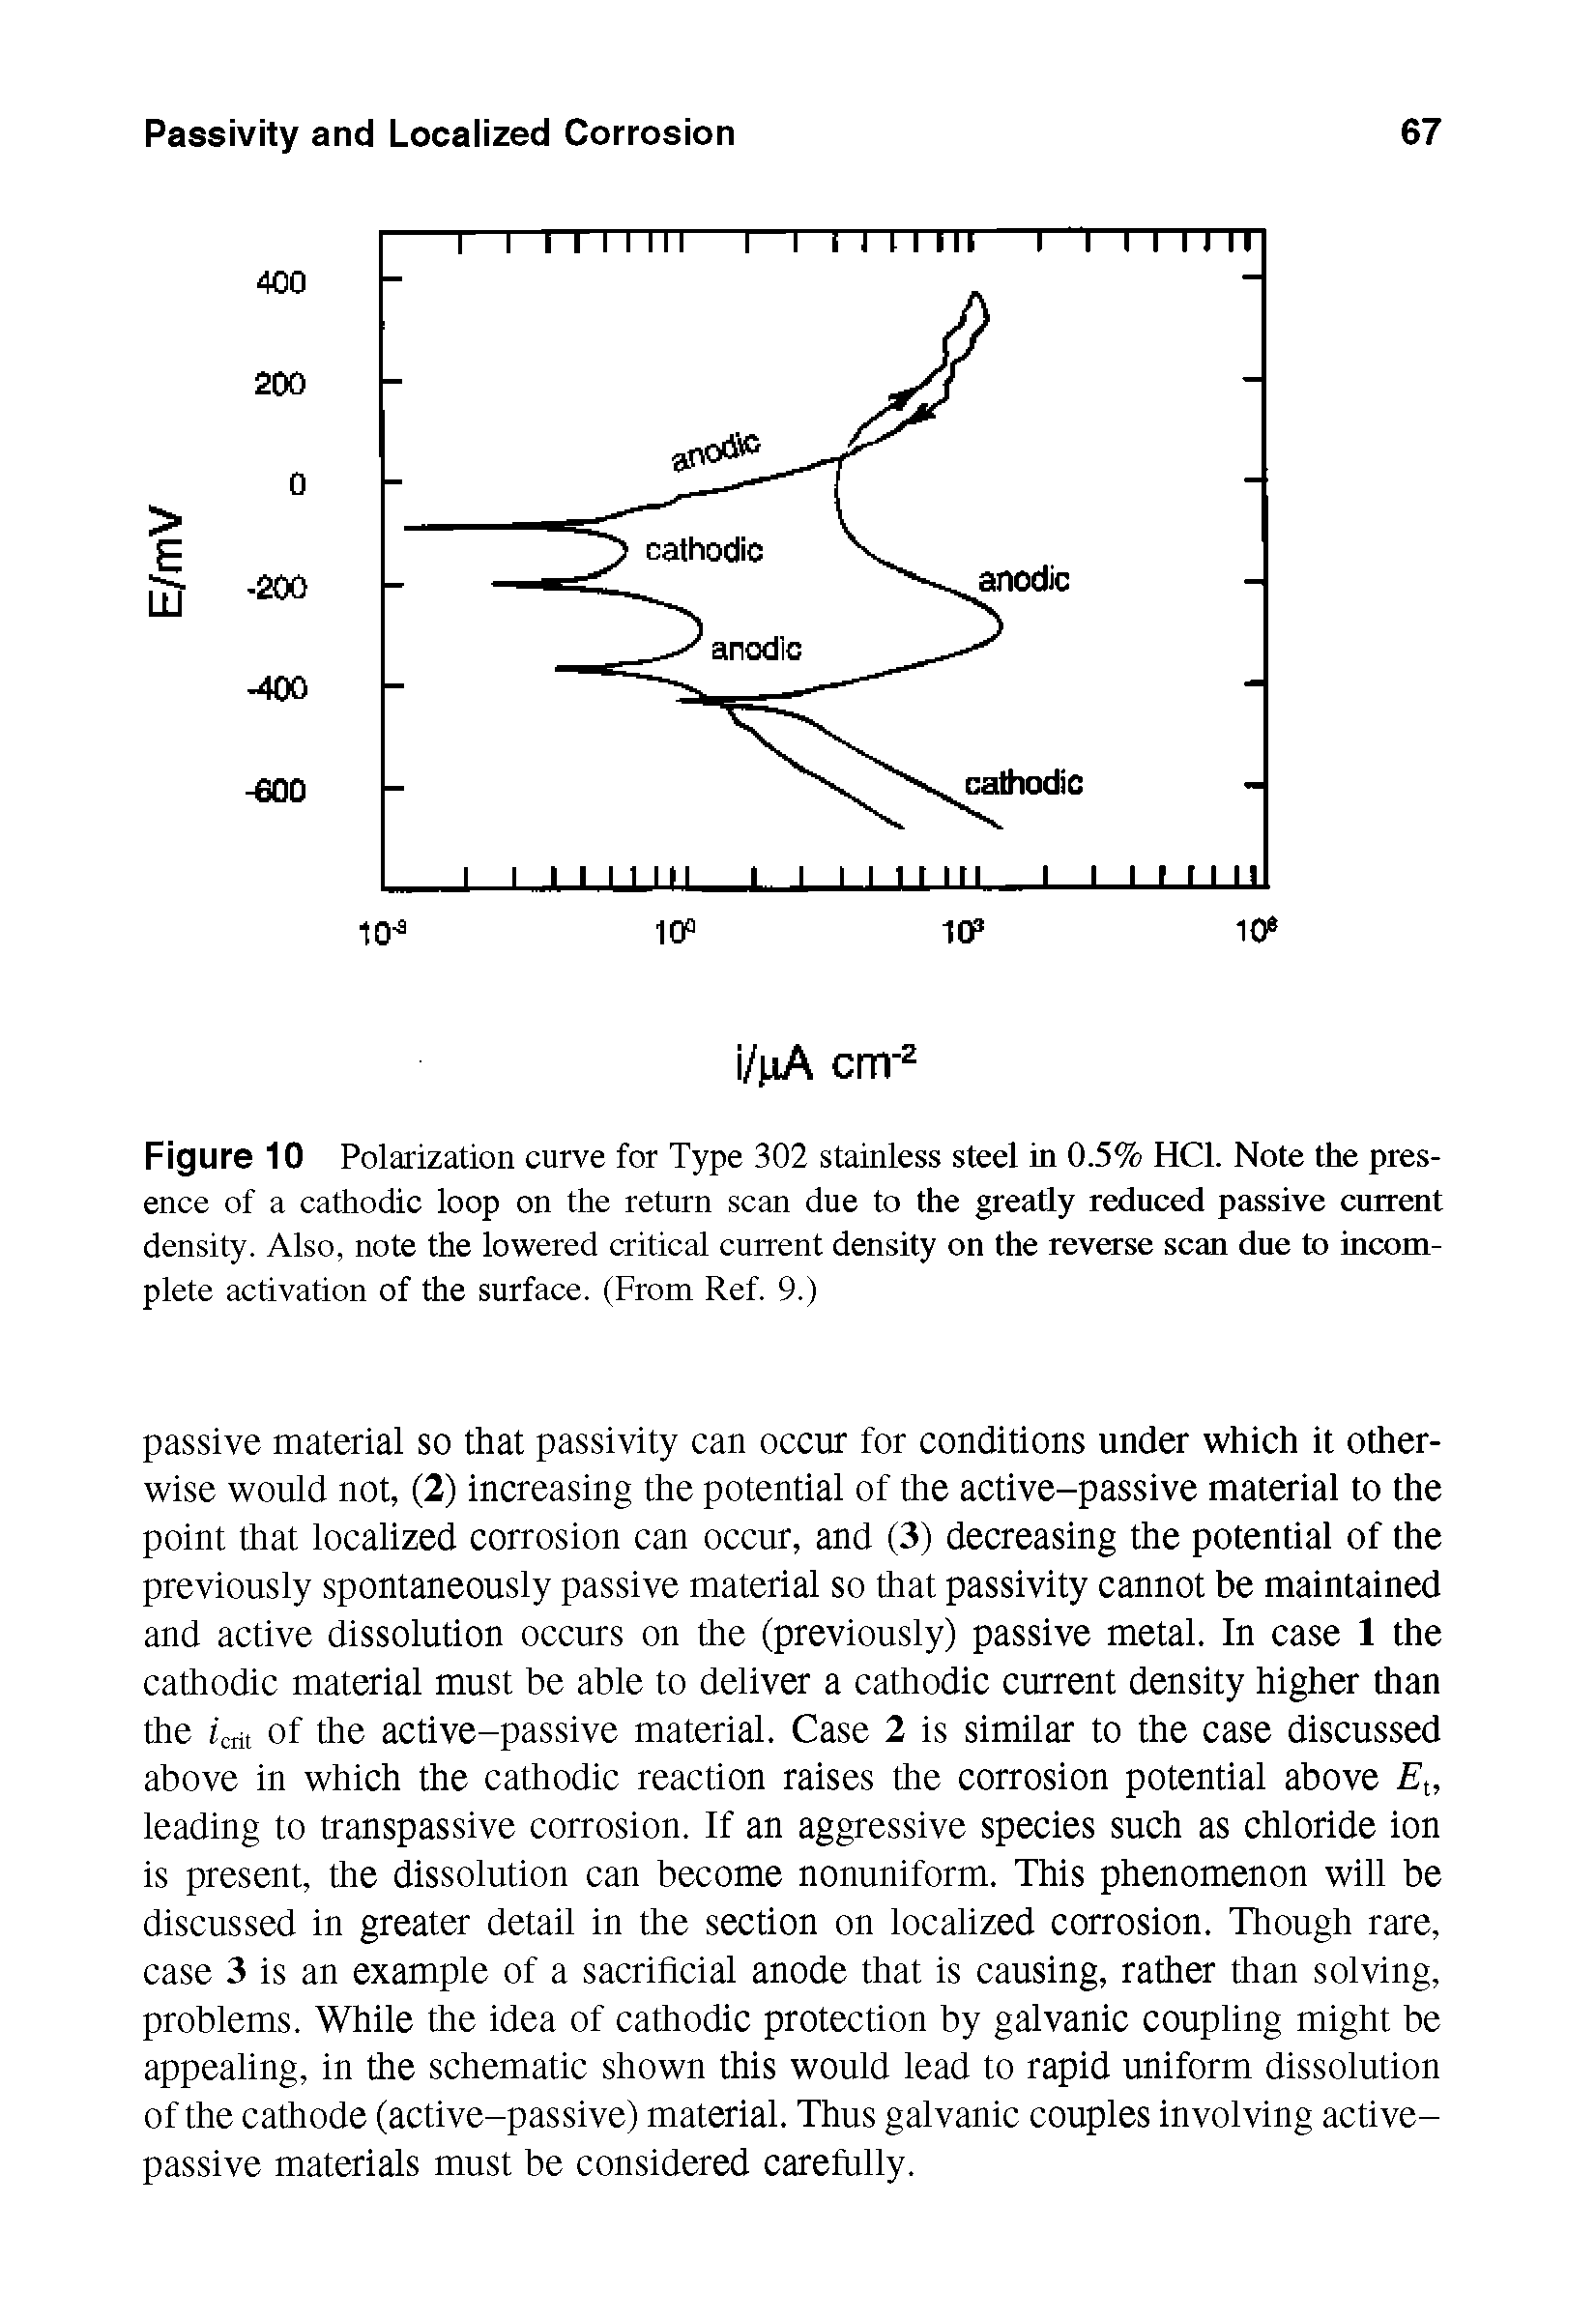 Figure 10 Polarization curve for Type 302 stainless steel in 0.5% HC1. Note the presence of a cathodic loop on the return scan due to the greatly reduced passive current density. Also, note the lowered critical current density on the reverse scan due to incomplete activation of the surface. (From Ref. 9.)...